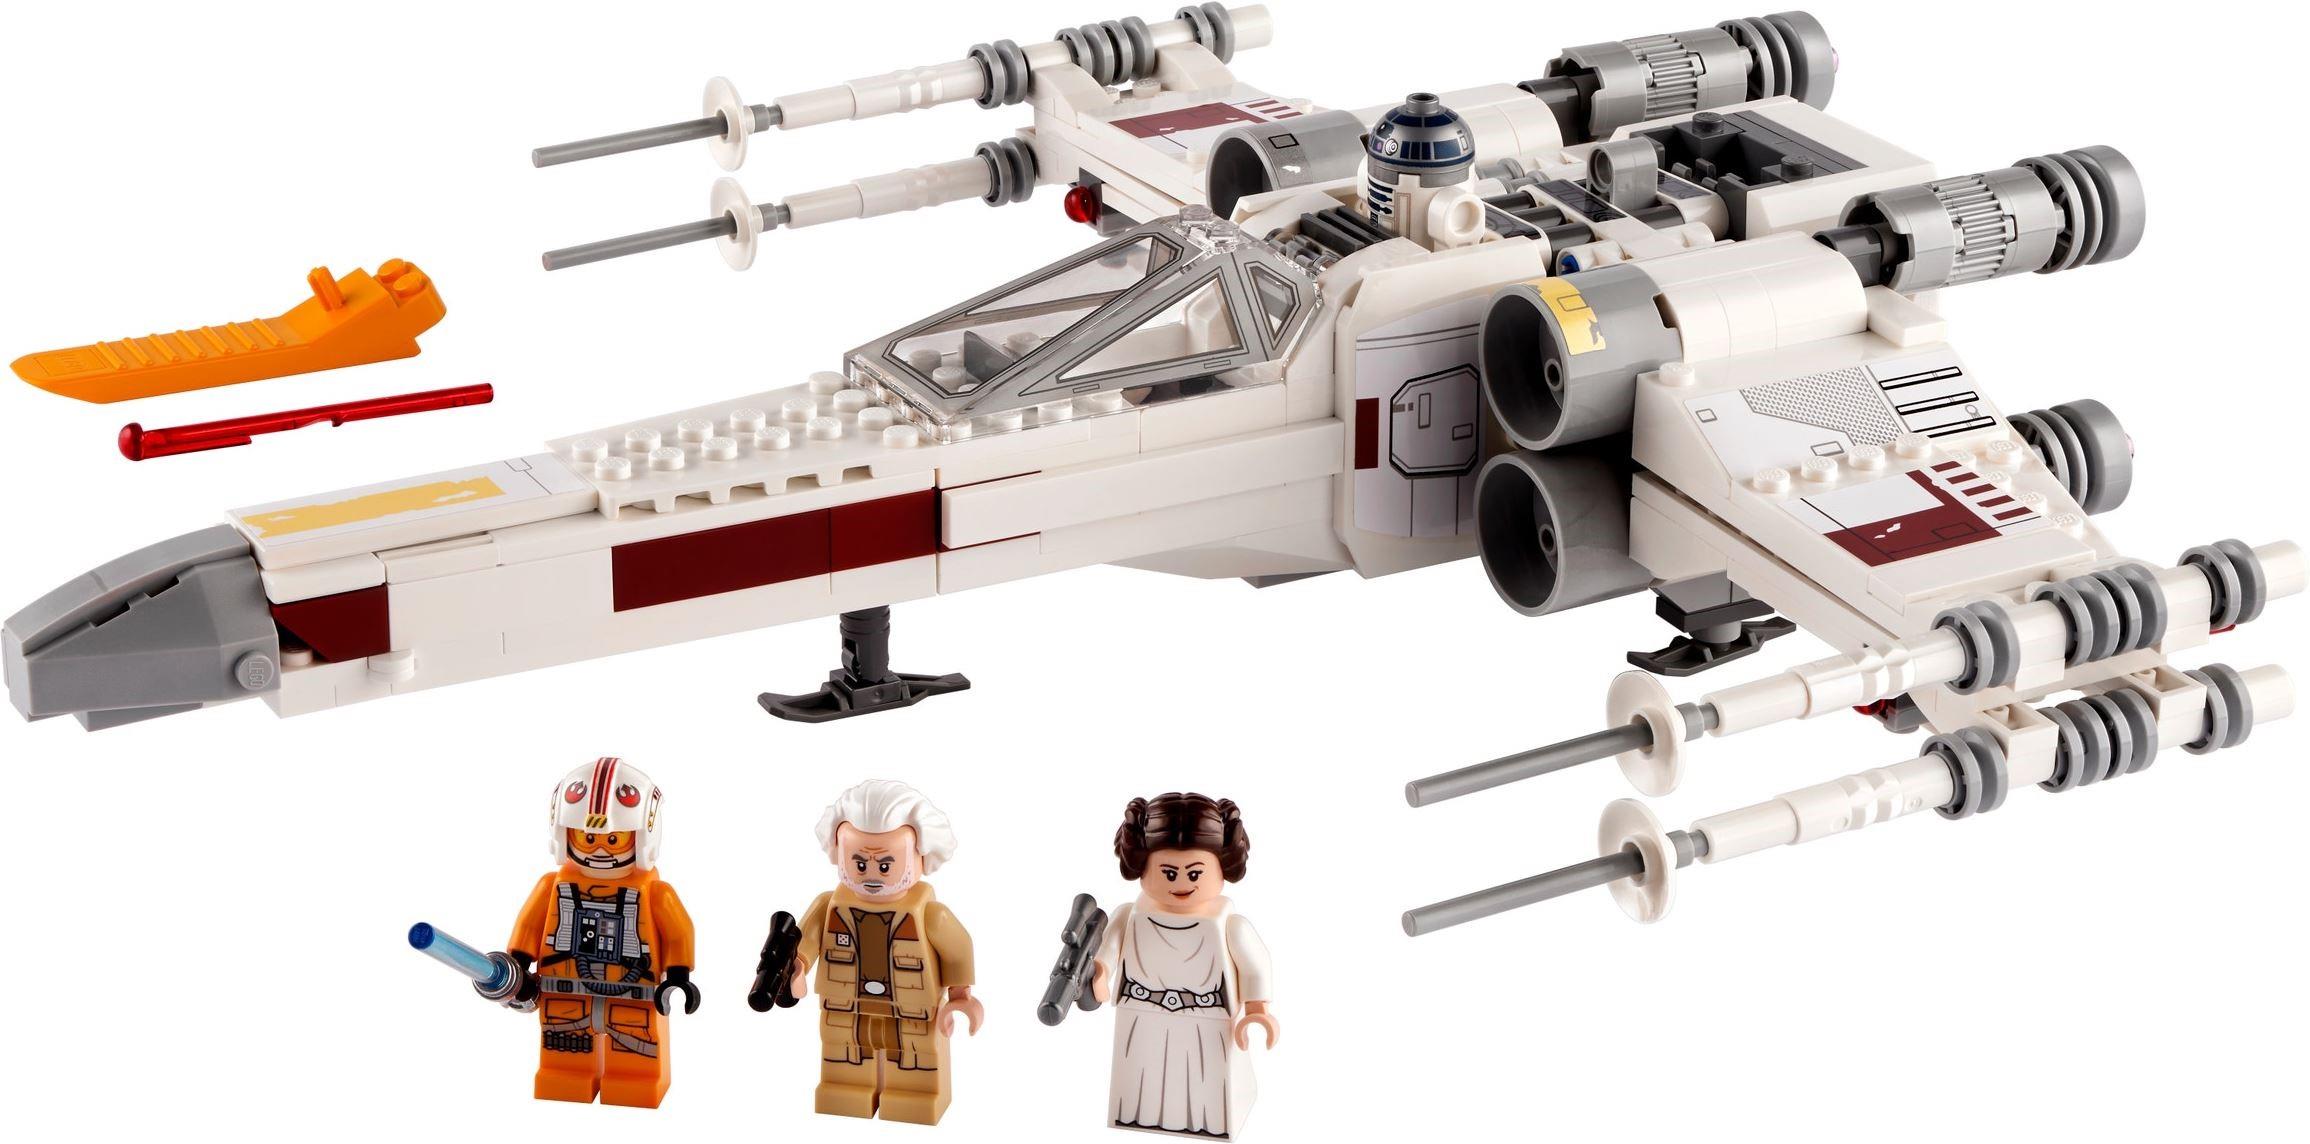 LEGO Star Wars 75301 Luke Skywalker's X-Wing Fighter review and gallery